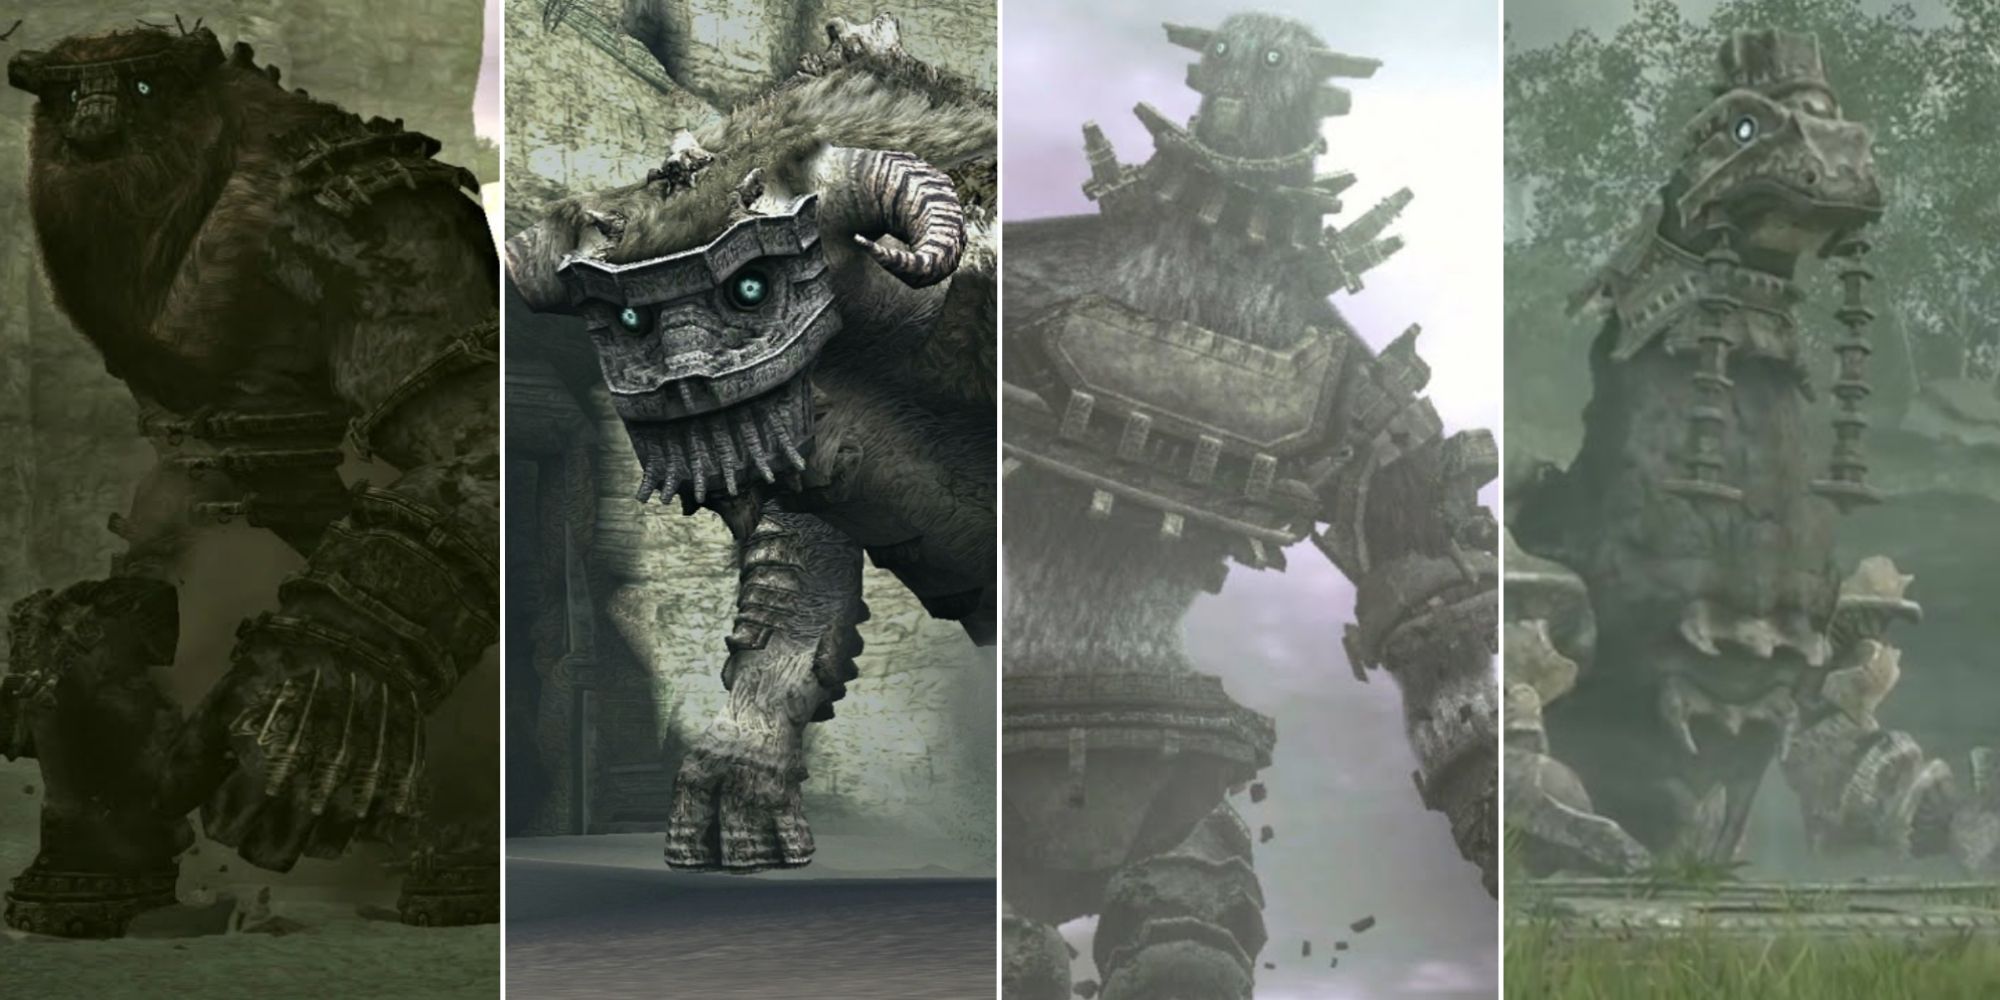 Phaedra, Wiki Shadow of the Colossus